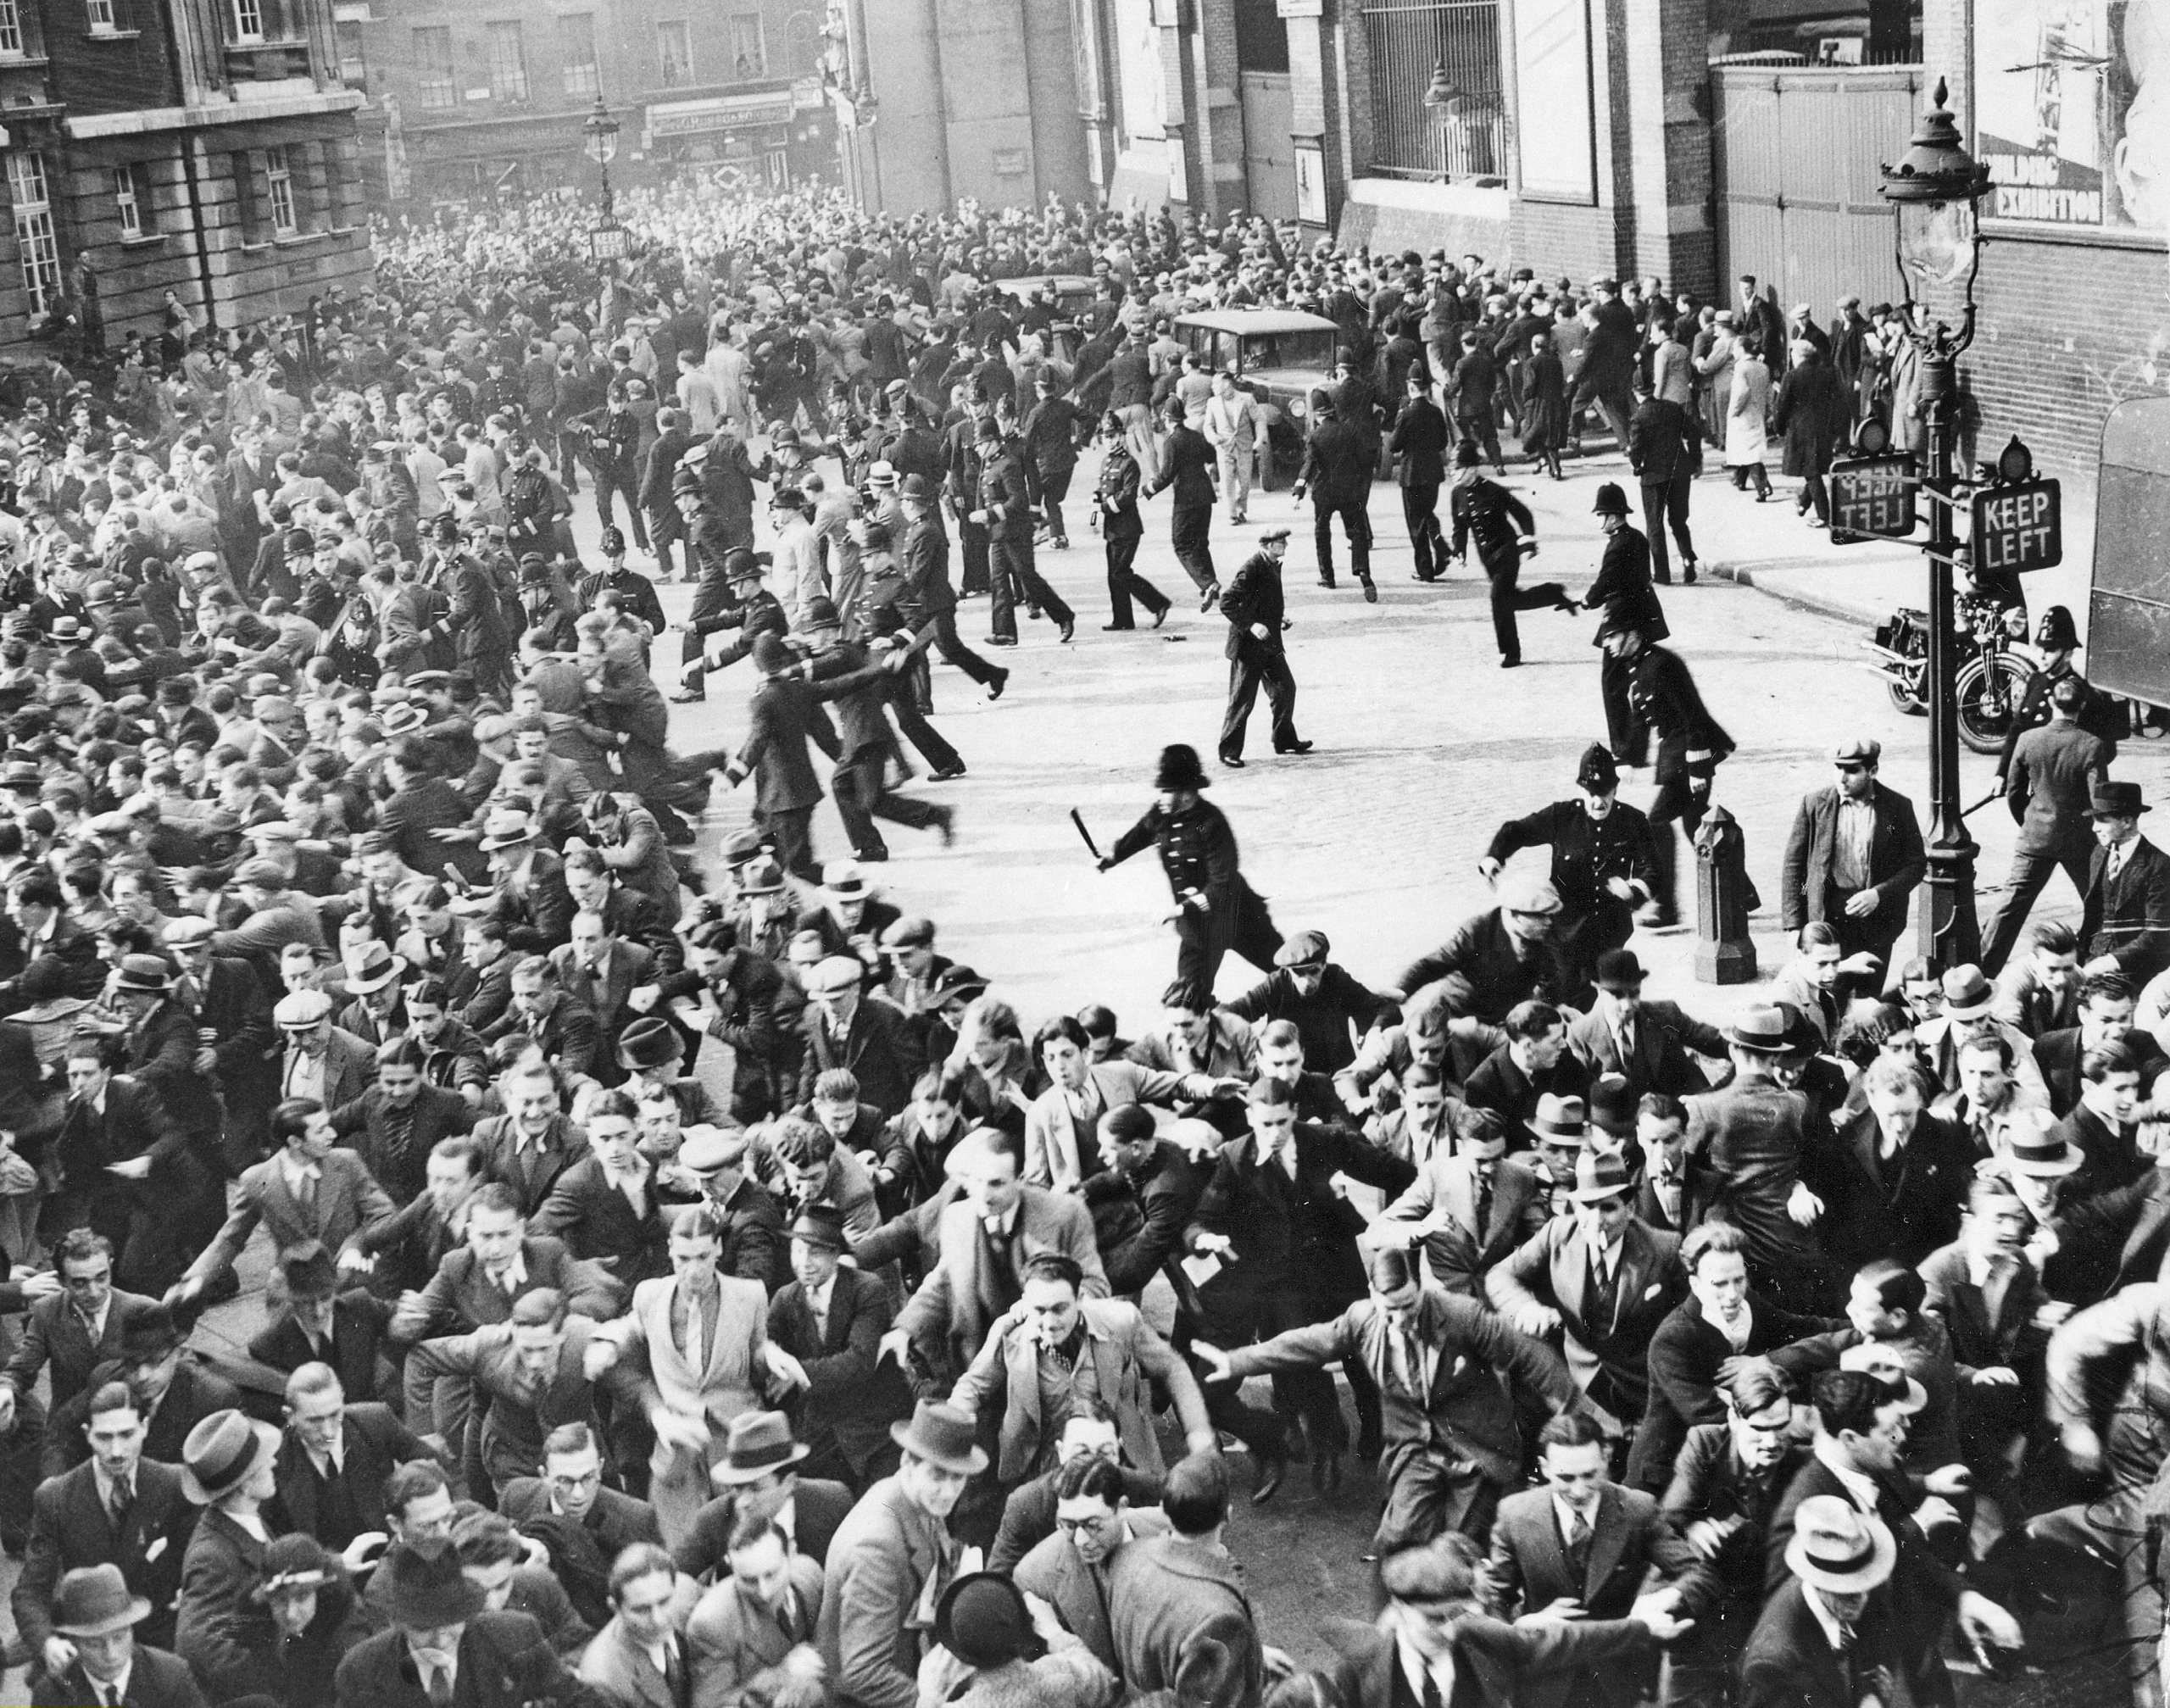 Riots erupted between anti-Fascists and Blackshirts (British Fascists) when Mosley's supporters were gathering in Great Mint Street for a march through the East End of London in what is now called the Battle of Cable Street on Oct. 4, 1936. (ullstein bild via Getty Images)